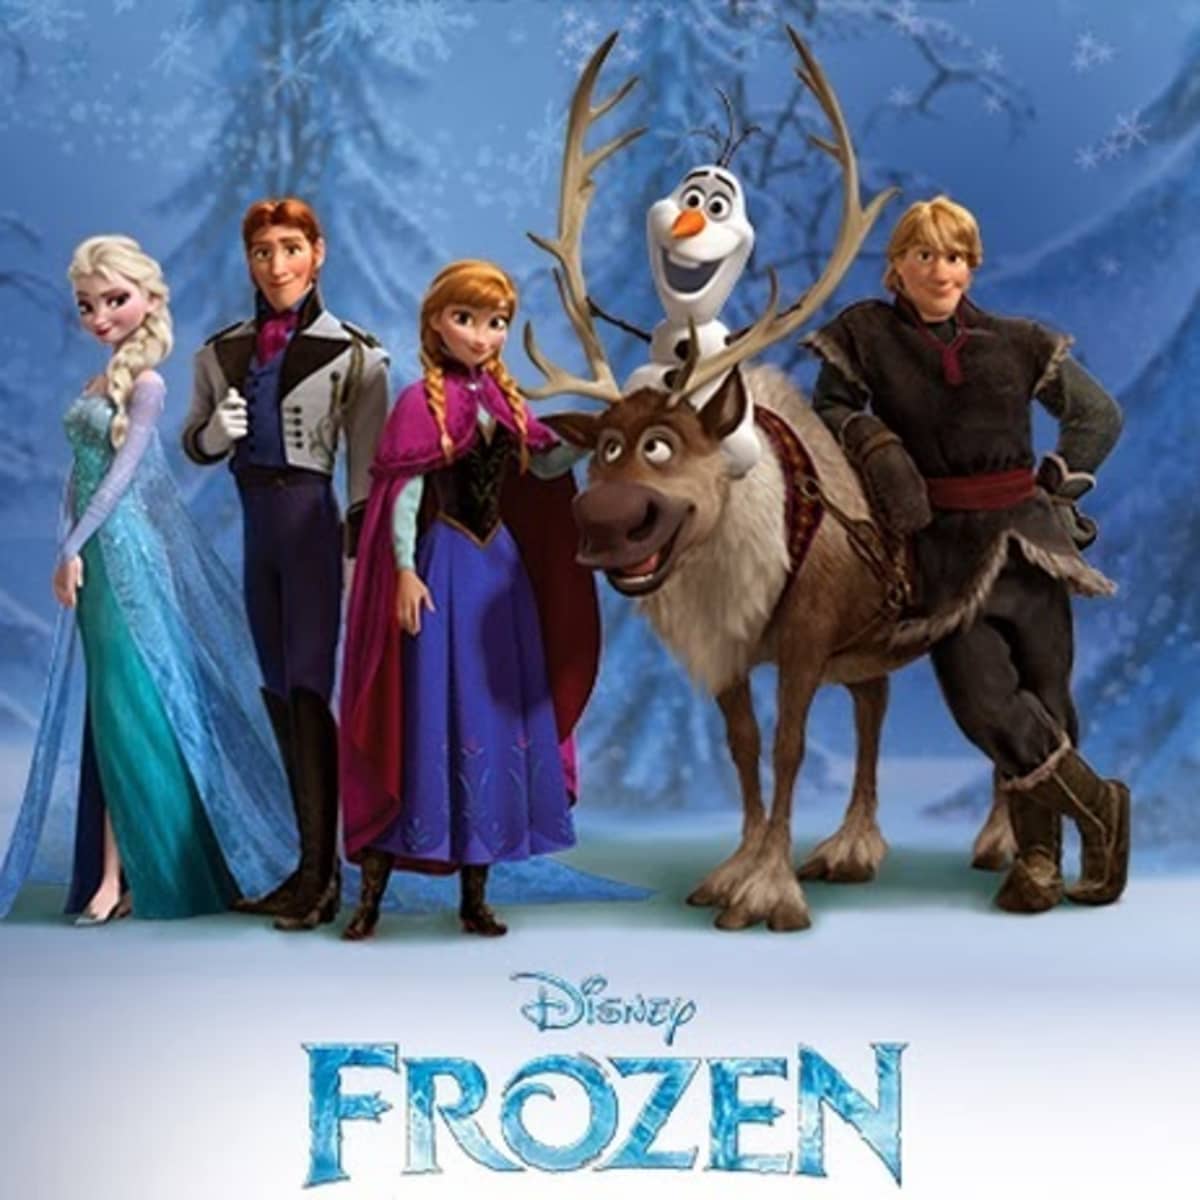 4 Reasons Why Disney's Frozen Is Not Worth the Hype - HubPages